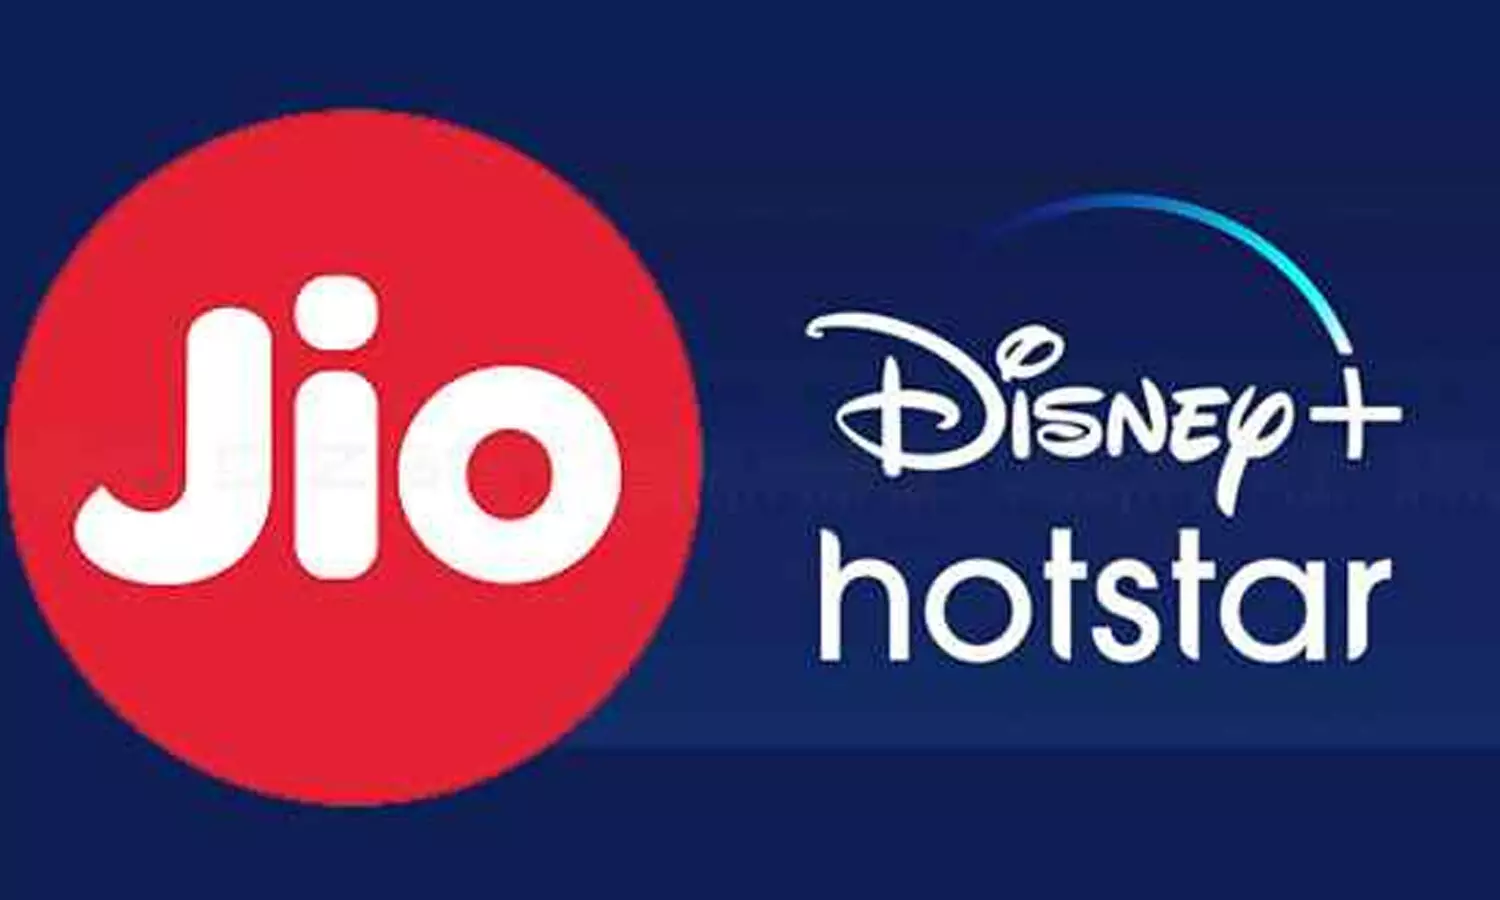 Reliance Jio Disney Hotstars full content will be available with new prepaid plans